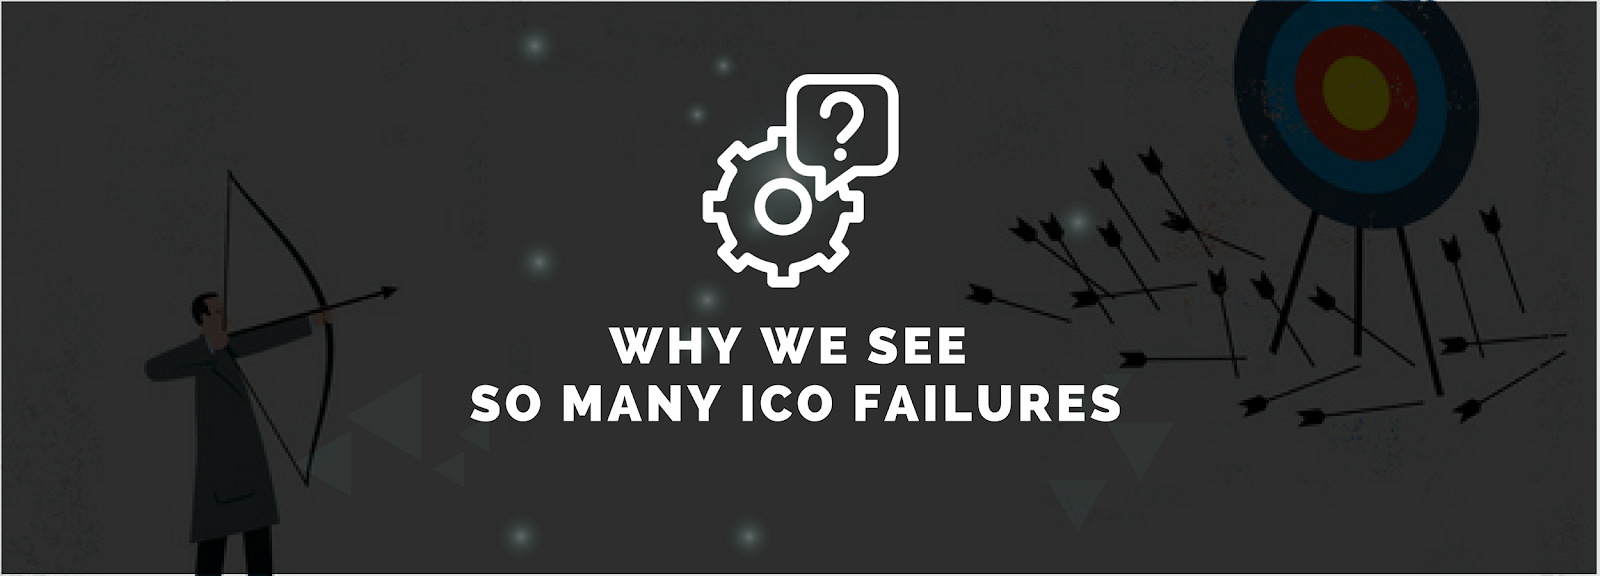 Why We See So Many ICO Failures